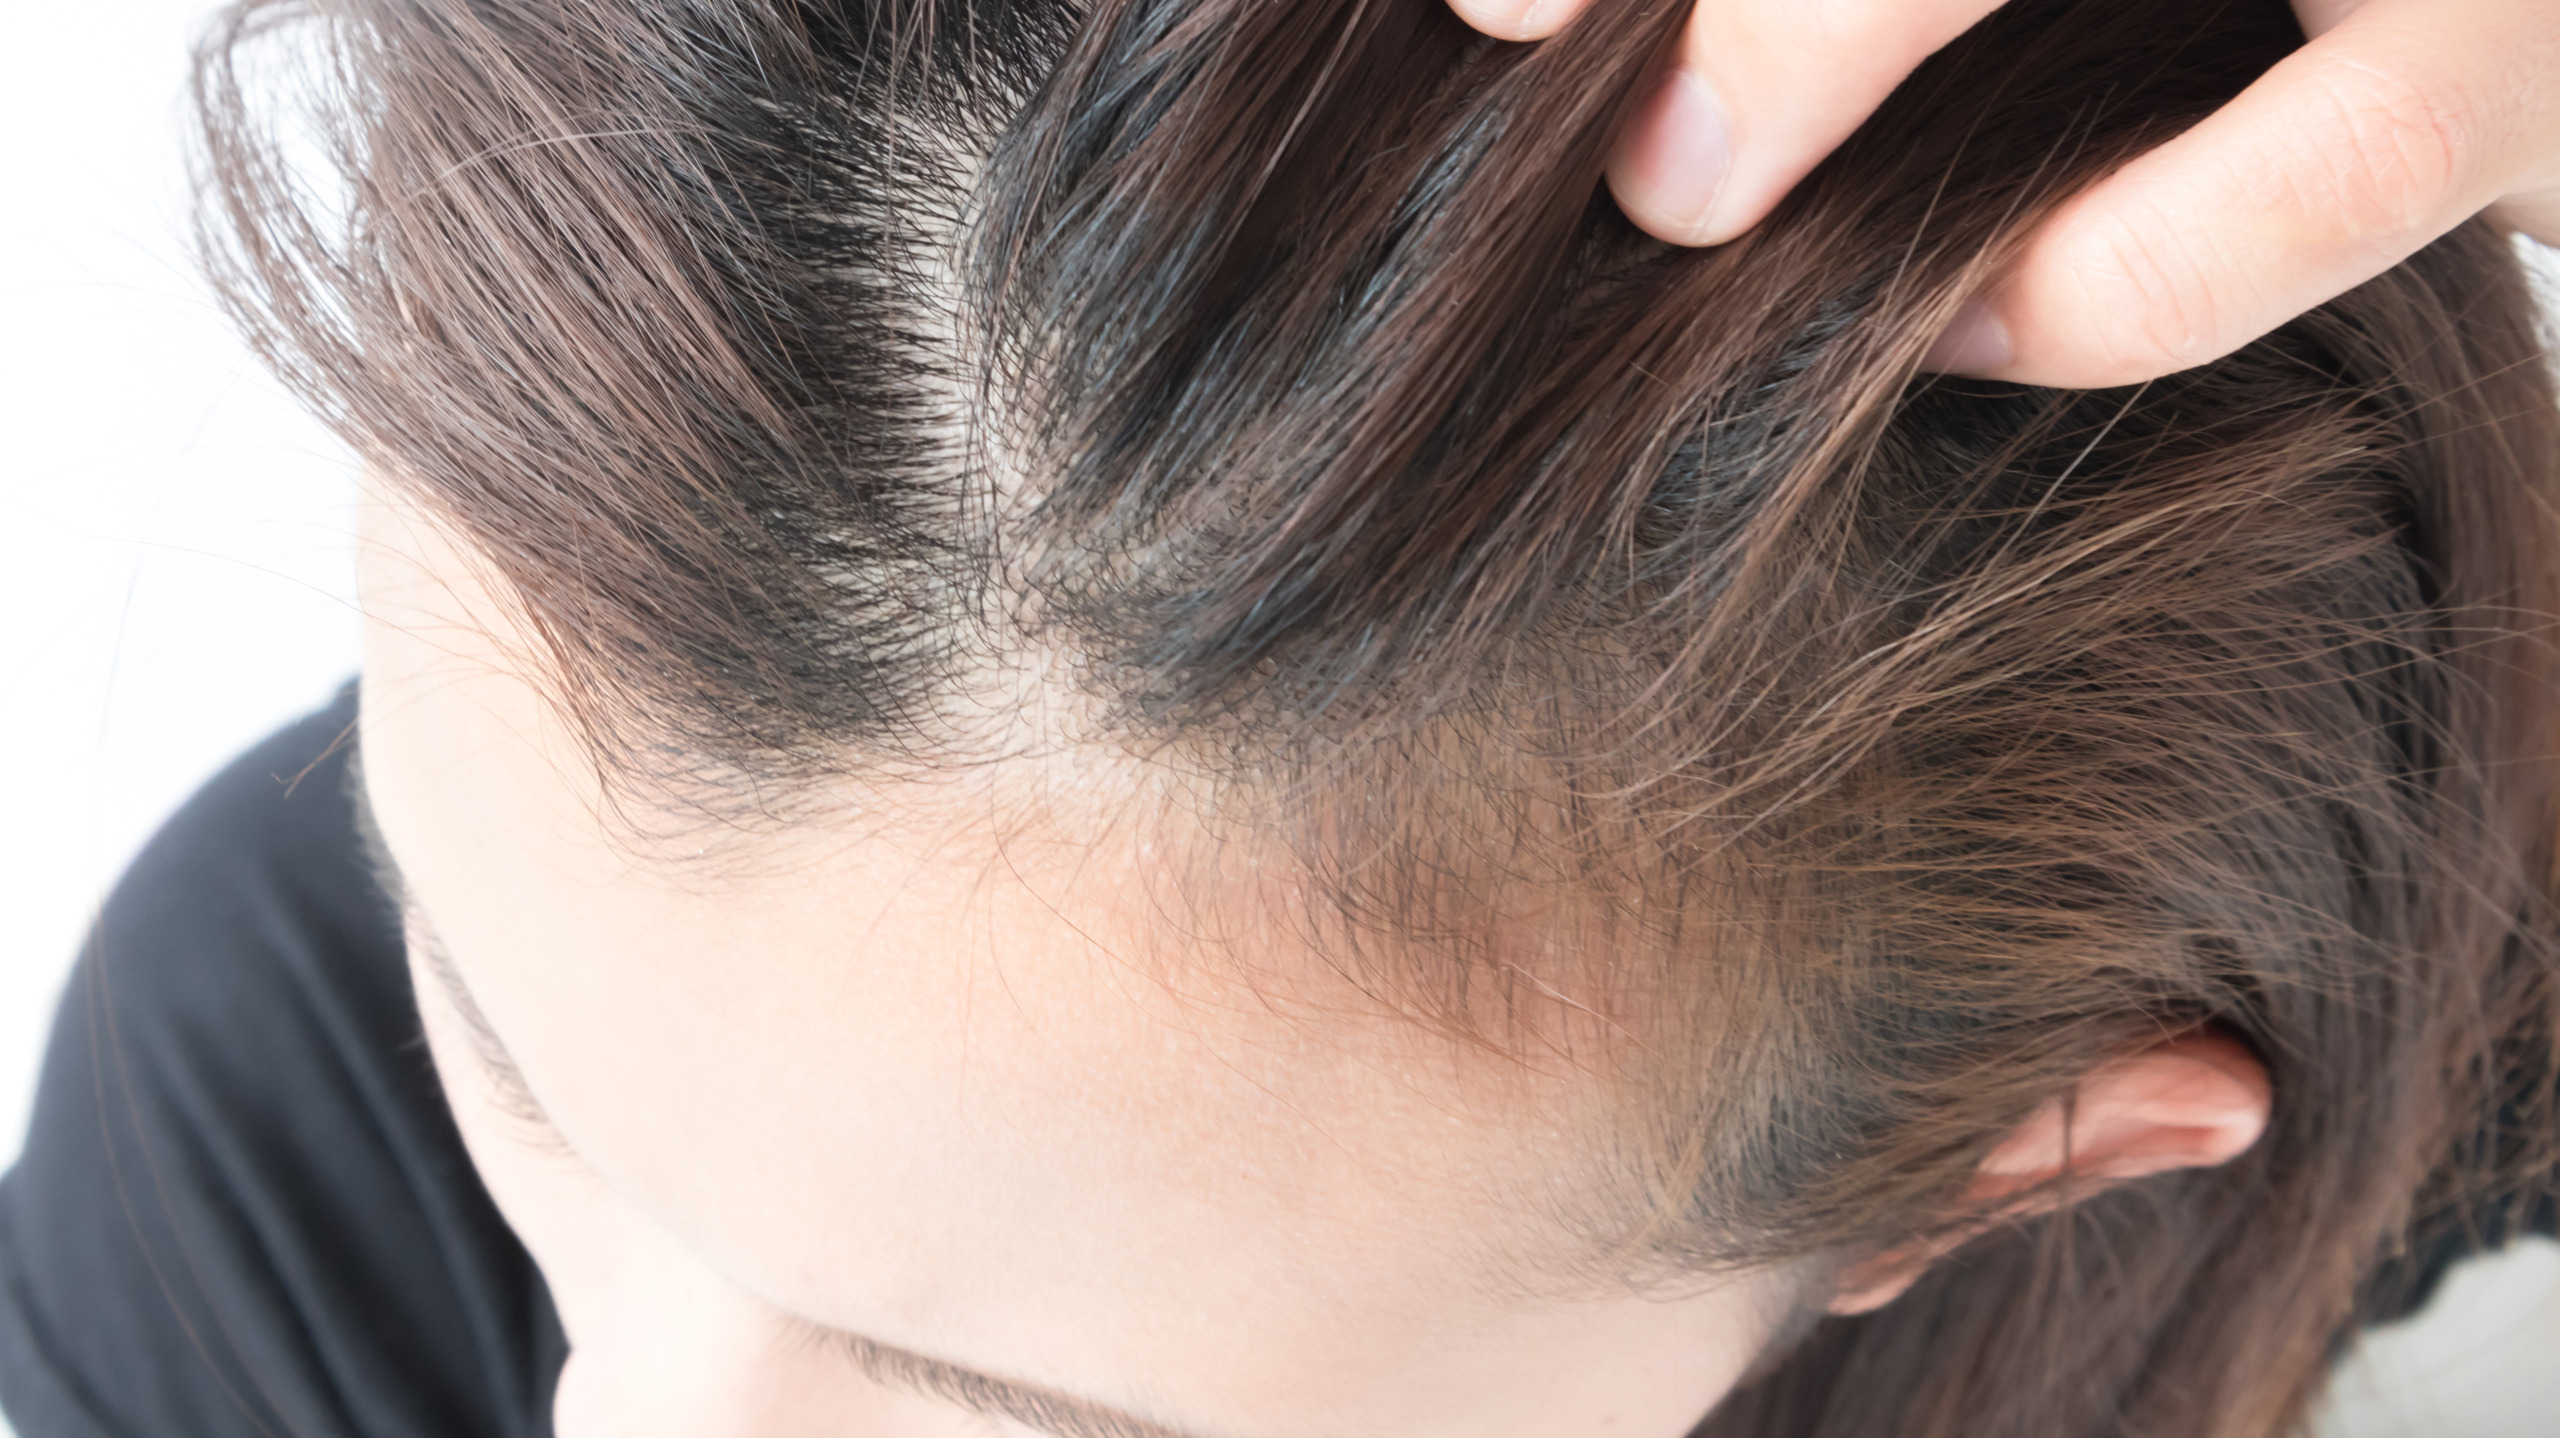 My Hair Is So Thin I Can See My Scalp: What Should You Do?, Wimpole Clinic